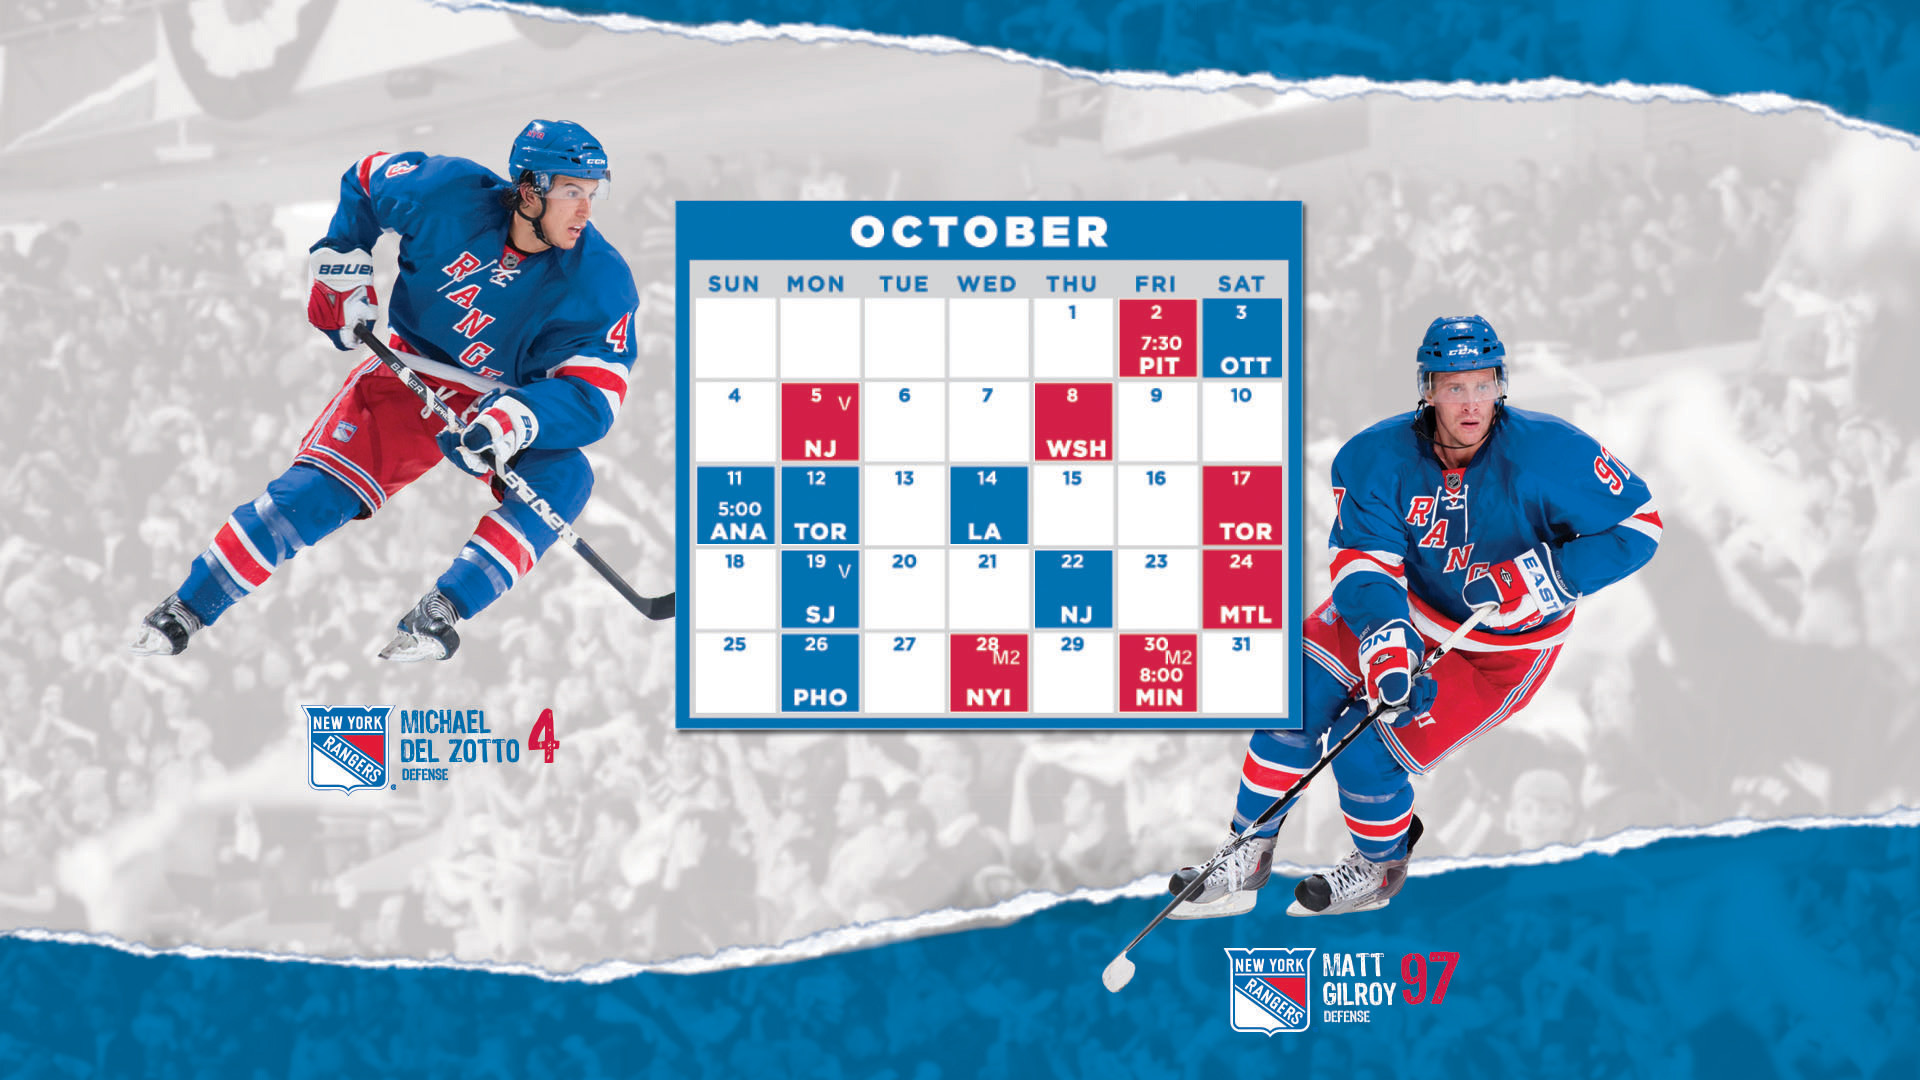 1920x1080 Rangers Wallpapers | Page 10 | HFBoards - NHL Message Board and Forum for  National Hockey League